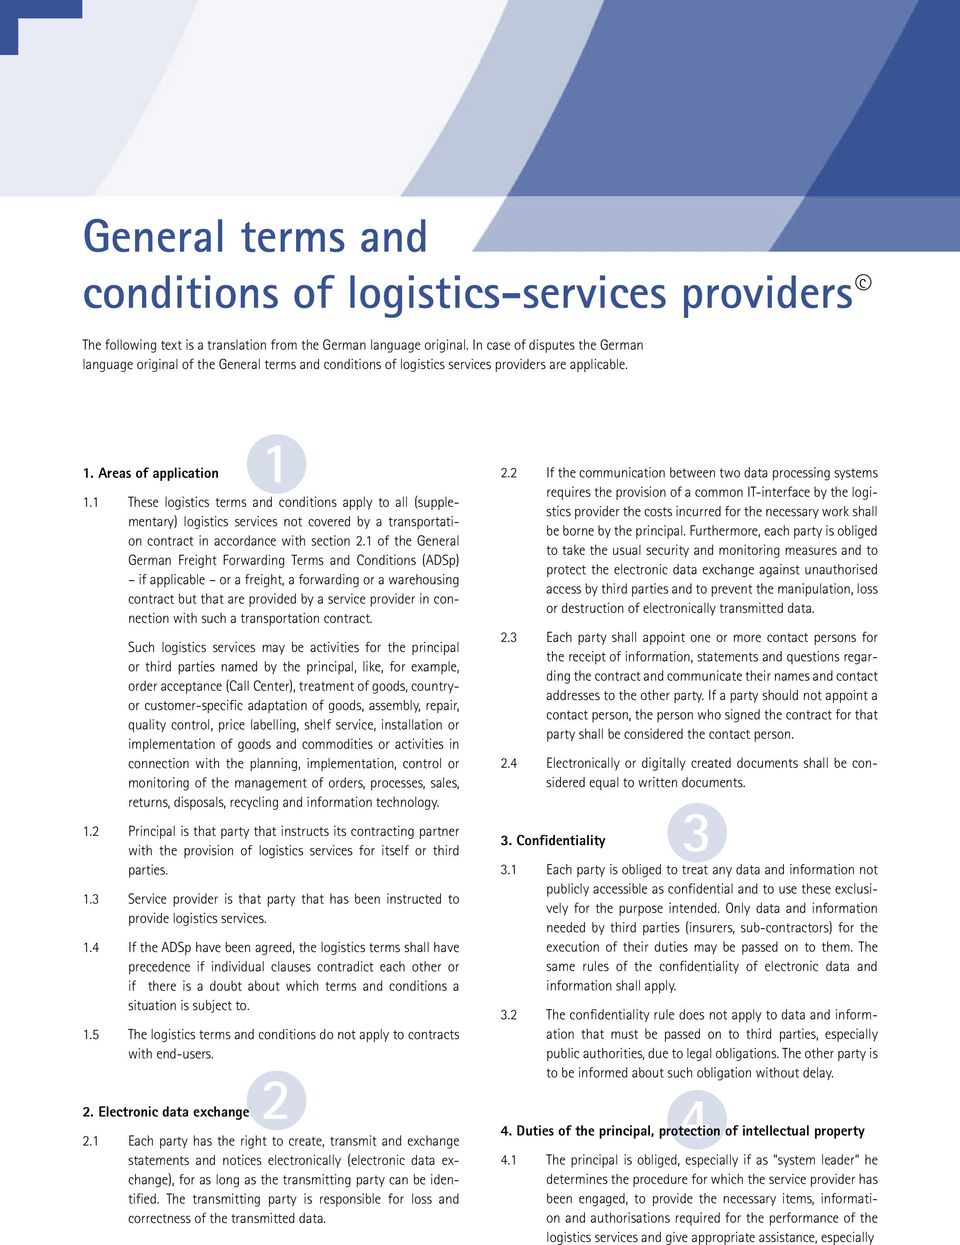 1 These logistics terms and conditions apply to all (supplementary) logistics services not covered by a transportation contract in accordance with section 2.